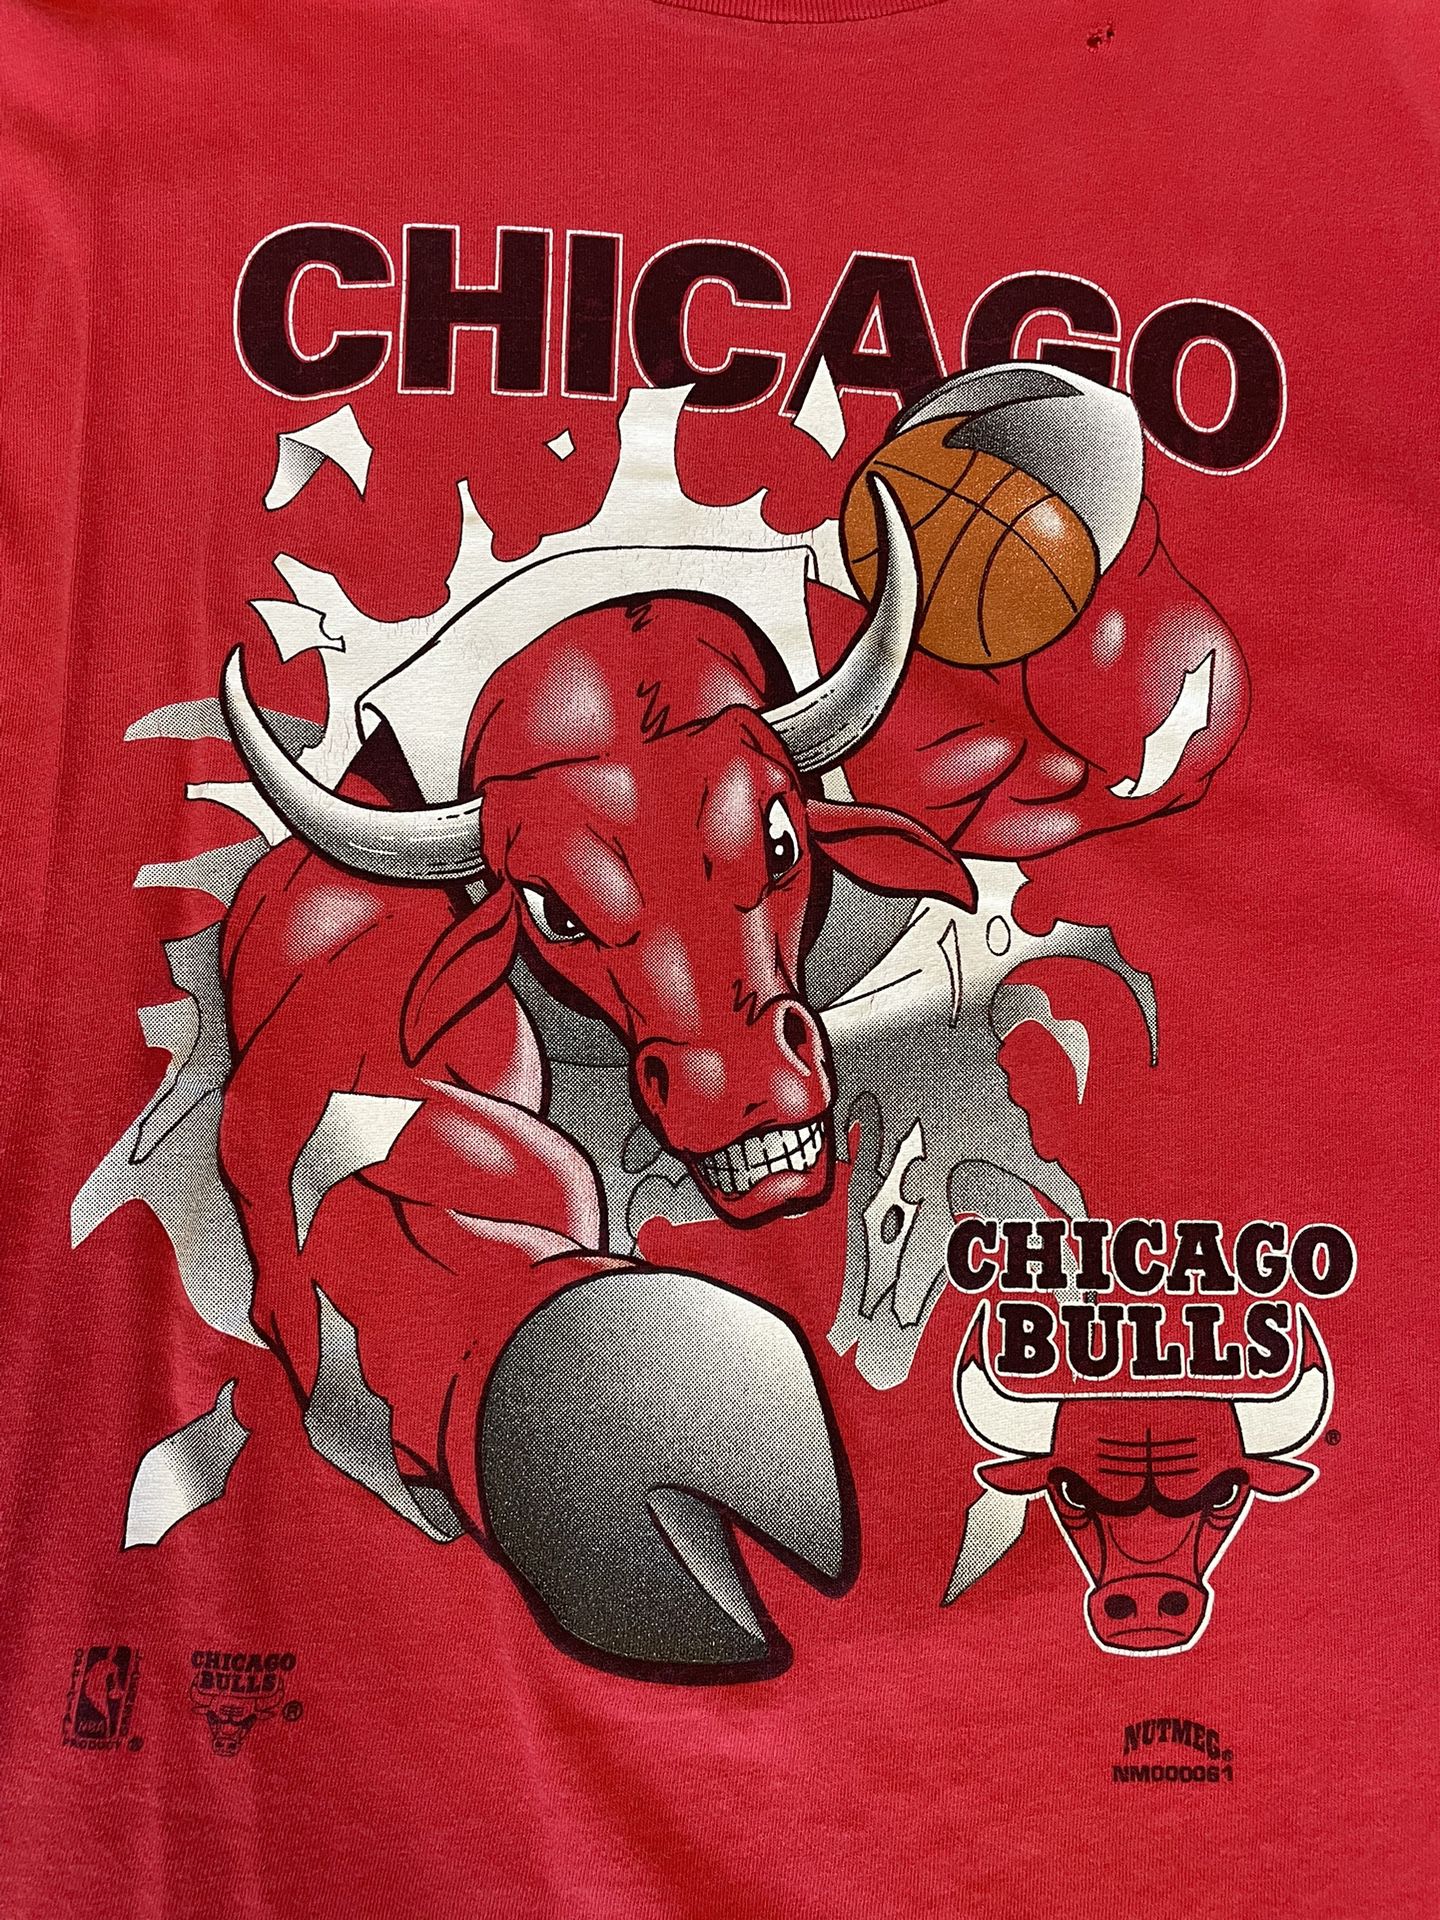 Chicago Bulls 1992 NBA Finals Championship T-Shirt by Nutmeg XL NEW w/Tags  Michael Jordan for Sale in Willowbrook, IL - OfferUp